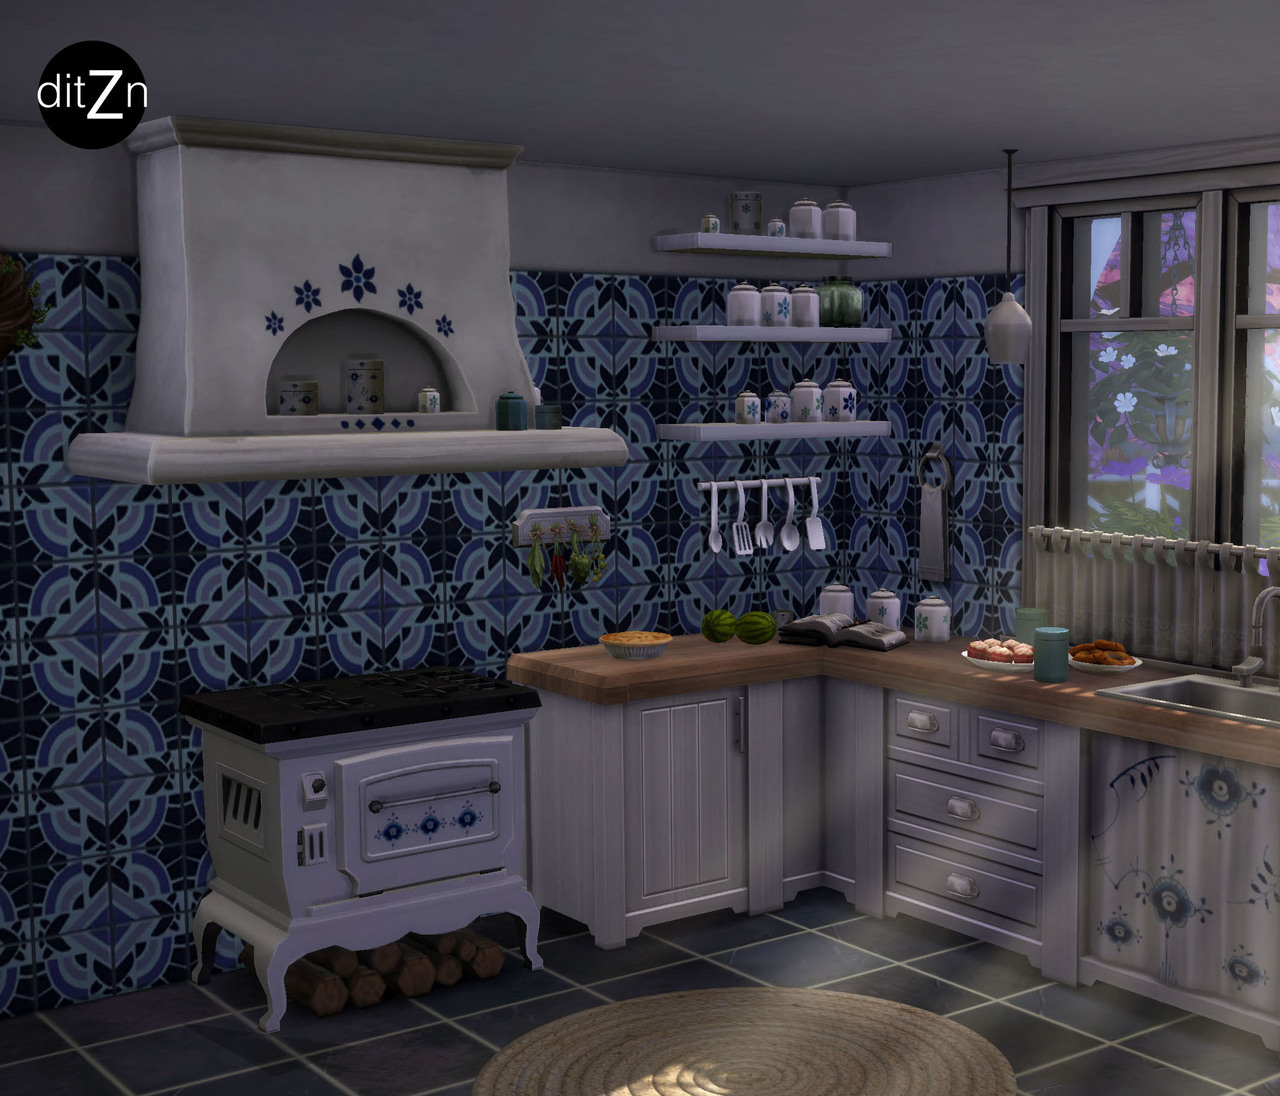 Sims 4 CC Build & Buy Mode - ditzn: Antique Stove Hood Inspired by old...